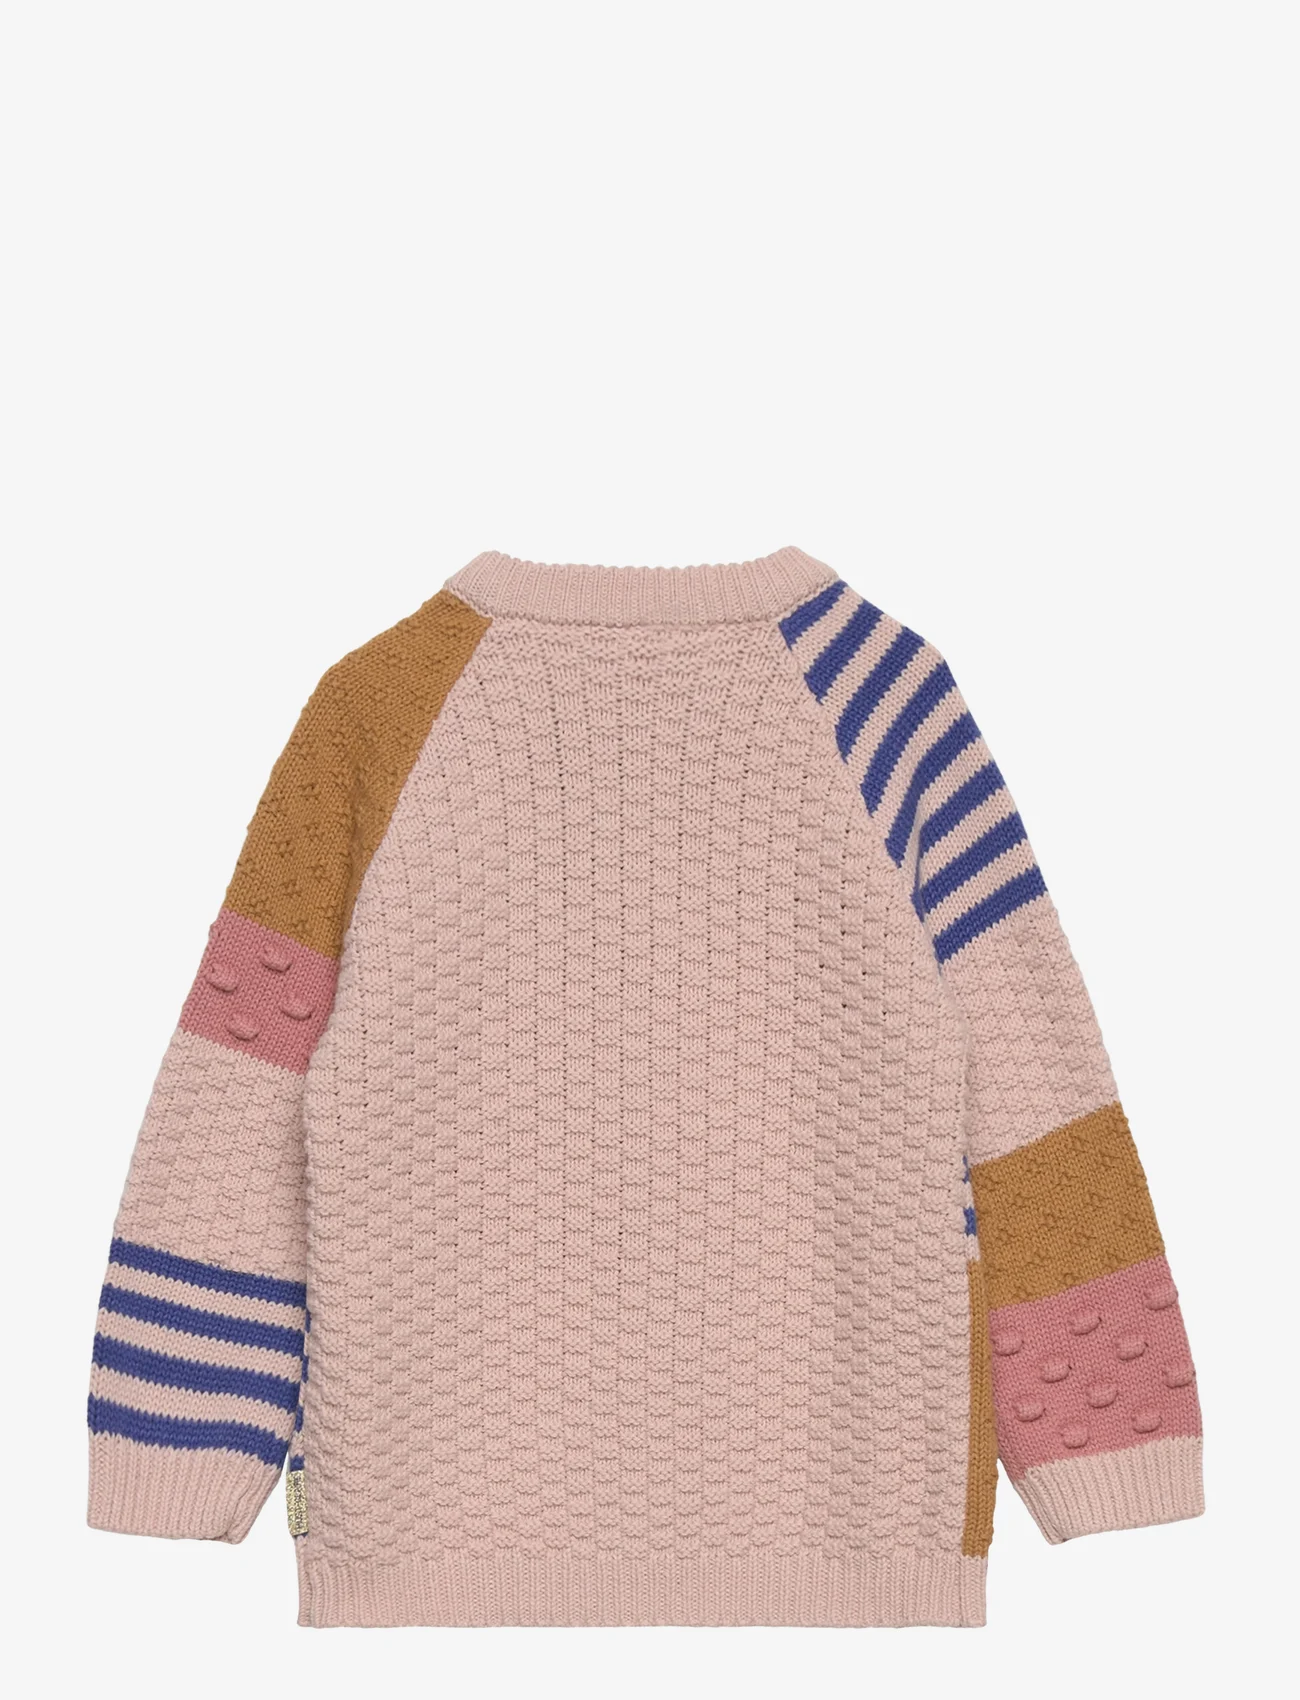 Hust & Claire - Nadiina - Pullover - trøjer - peach dust - 1